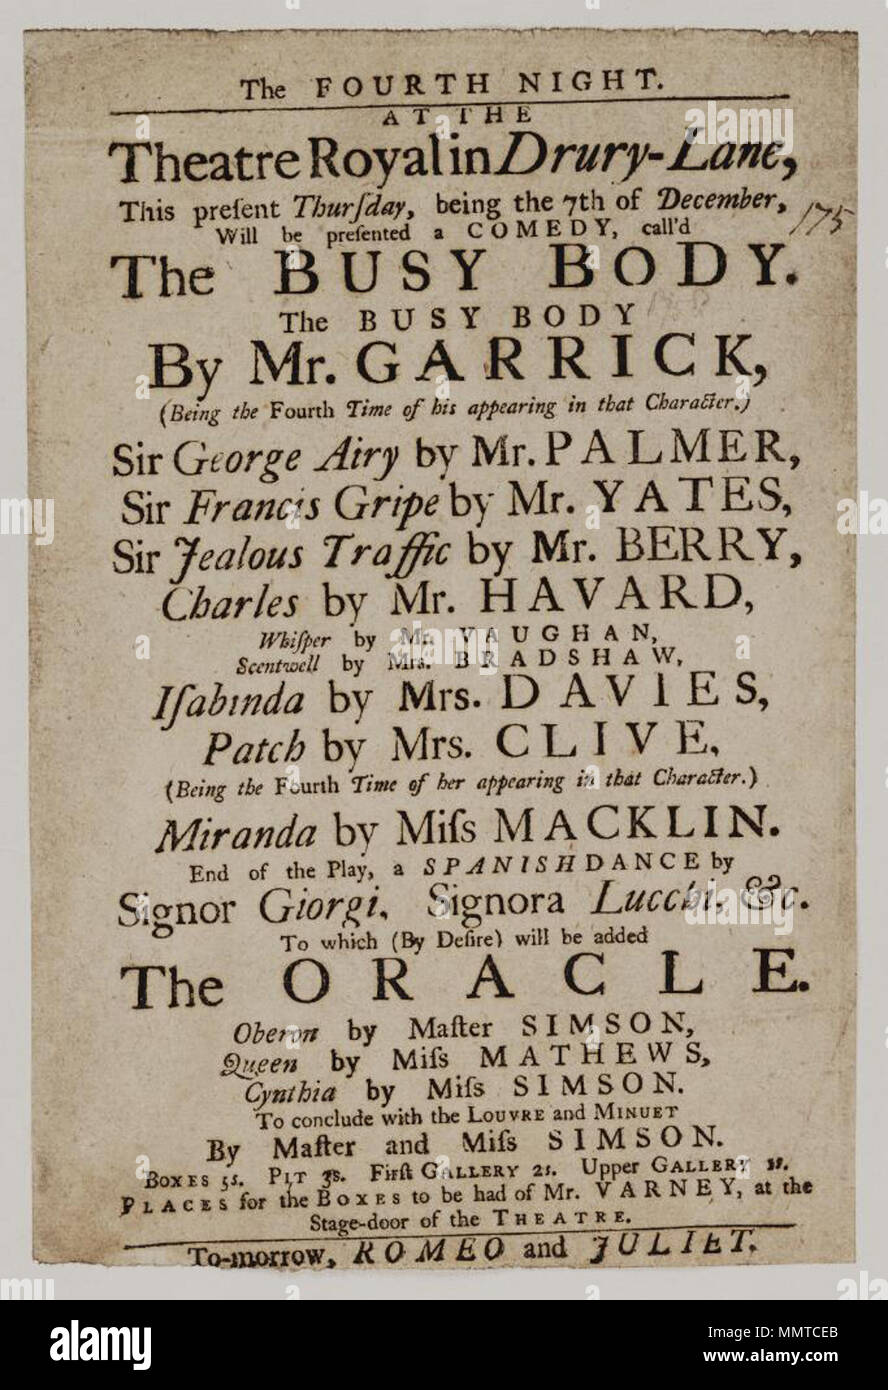 . Playbill of Drury Lane Theatre, Thursday, being the 7th of December [1758], announcing The busy body &c.; 175; Busy body; Spanish dance; Oracle; Louvre and minuet; Romeo and Juliet; [Playbill of Drury Lane Theatre, Thursday, being the 7th of December [1758], announcing The busy body &c.]  [Playbill of Drury Lane Theatre, Thursday, being the 7th of December [1758], announcing The busy body &c.]. 7 December 1758. Drury Lane Theatre [author] Bodleian Libraries, Playbill of Drury Lane Theatre, Thursday, being the 7th of December 1758, announcing The busy body &amp;c. Stock Photo